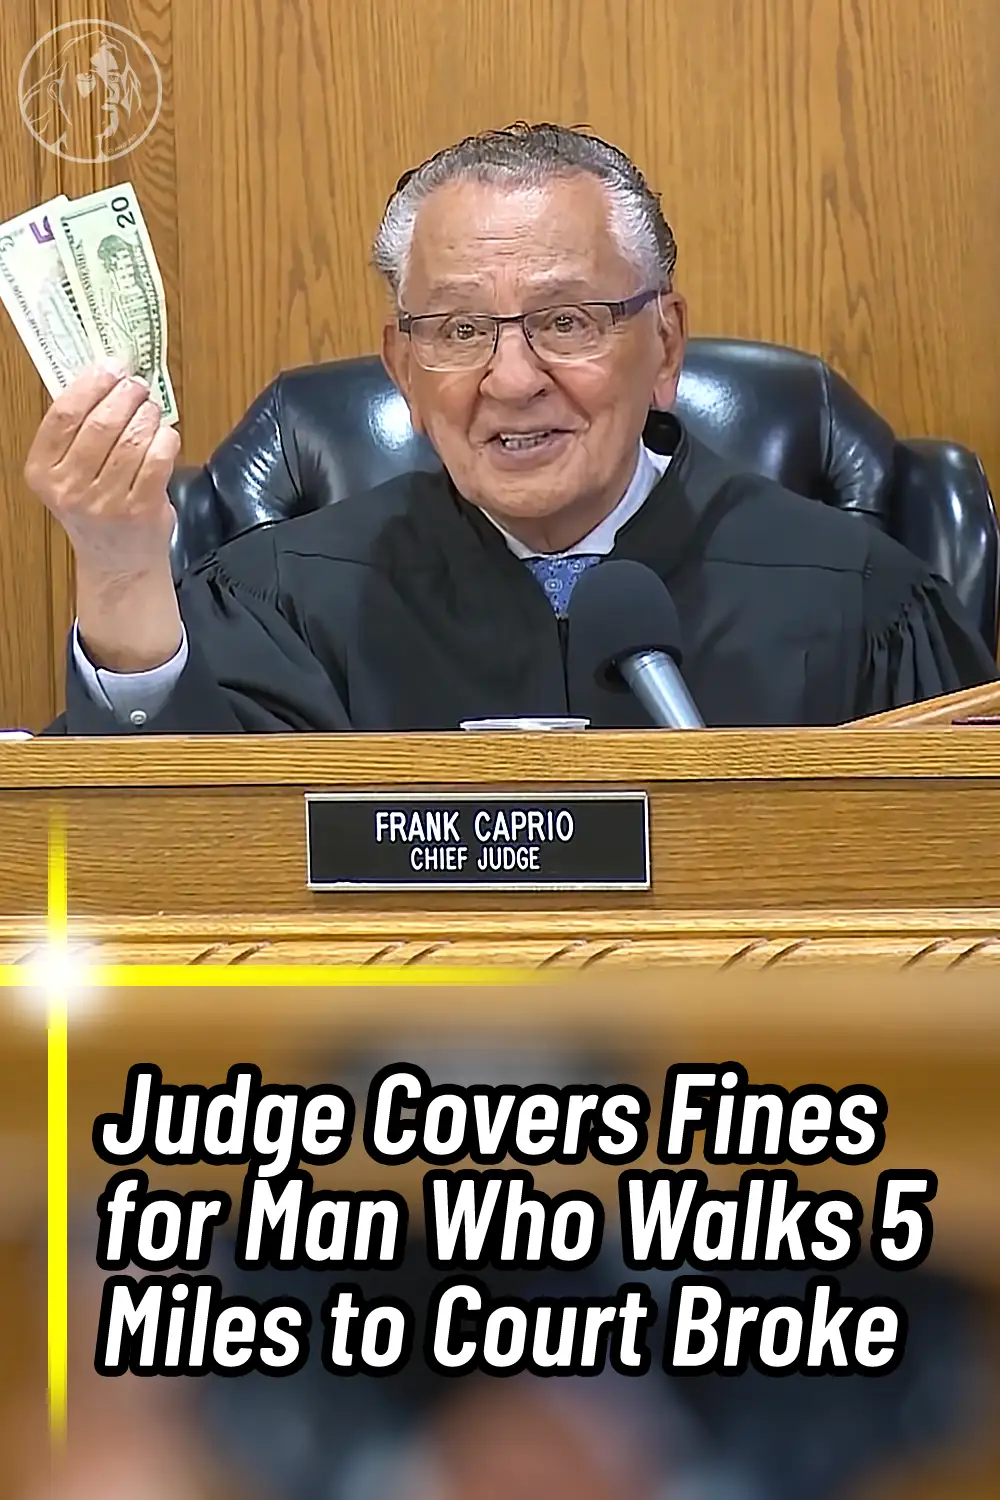 Judge Covers Fines for Man Who Walks 5 Miles to Court Broke